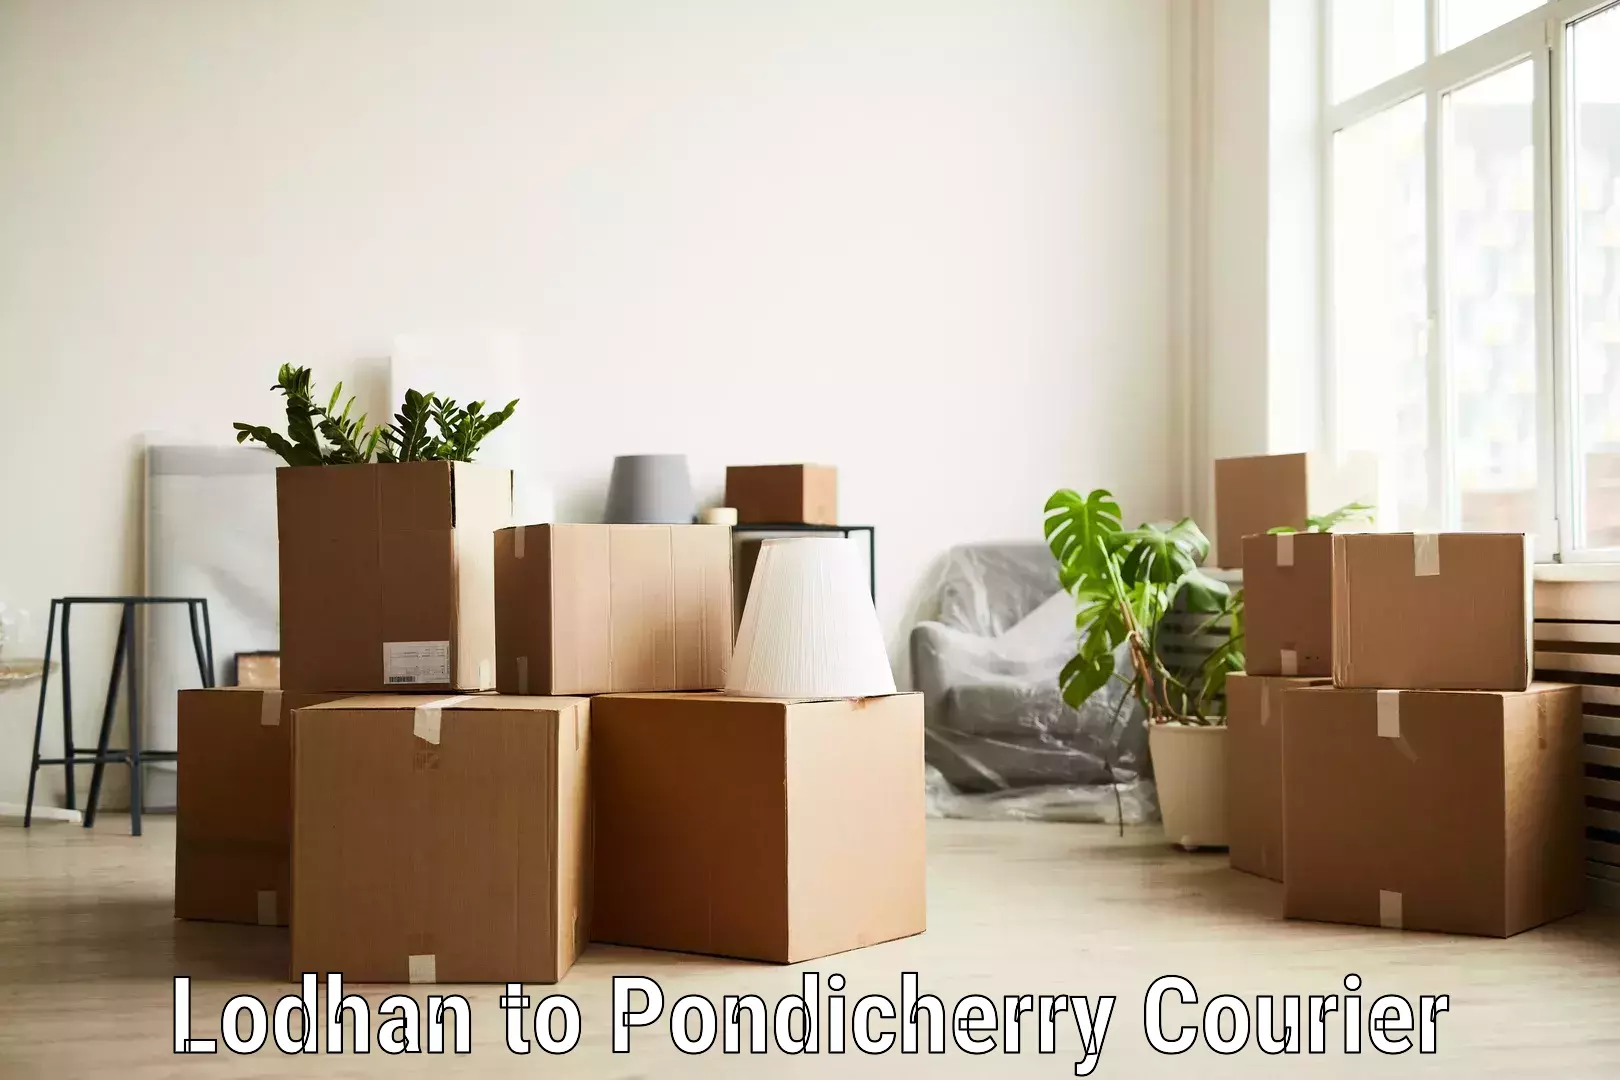 Wholesale parcel delivery in Lodhan to Pondicherry